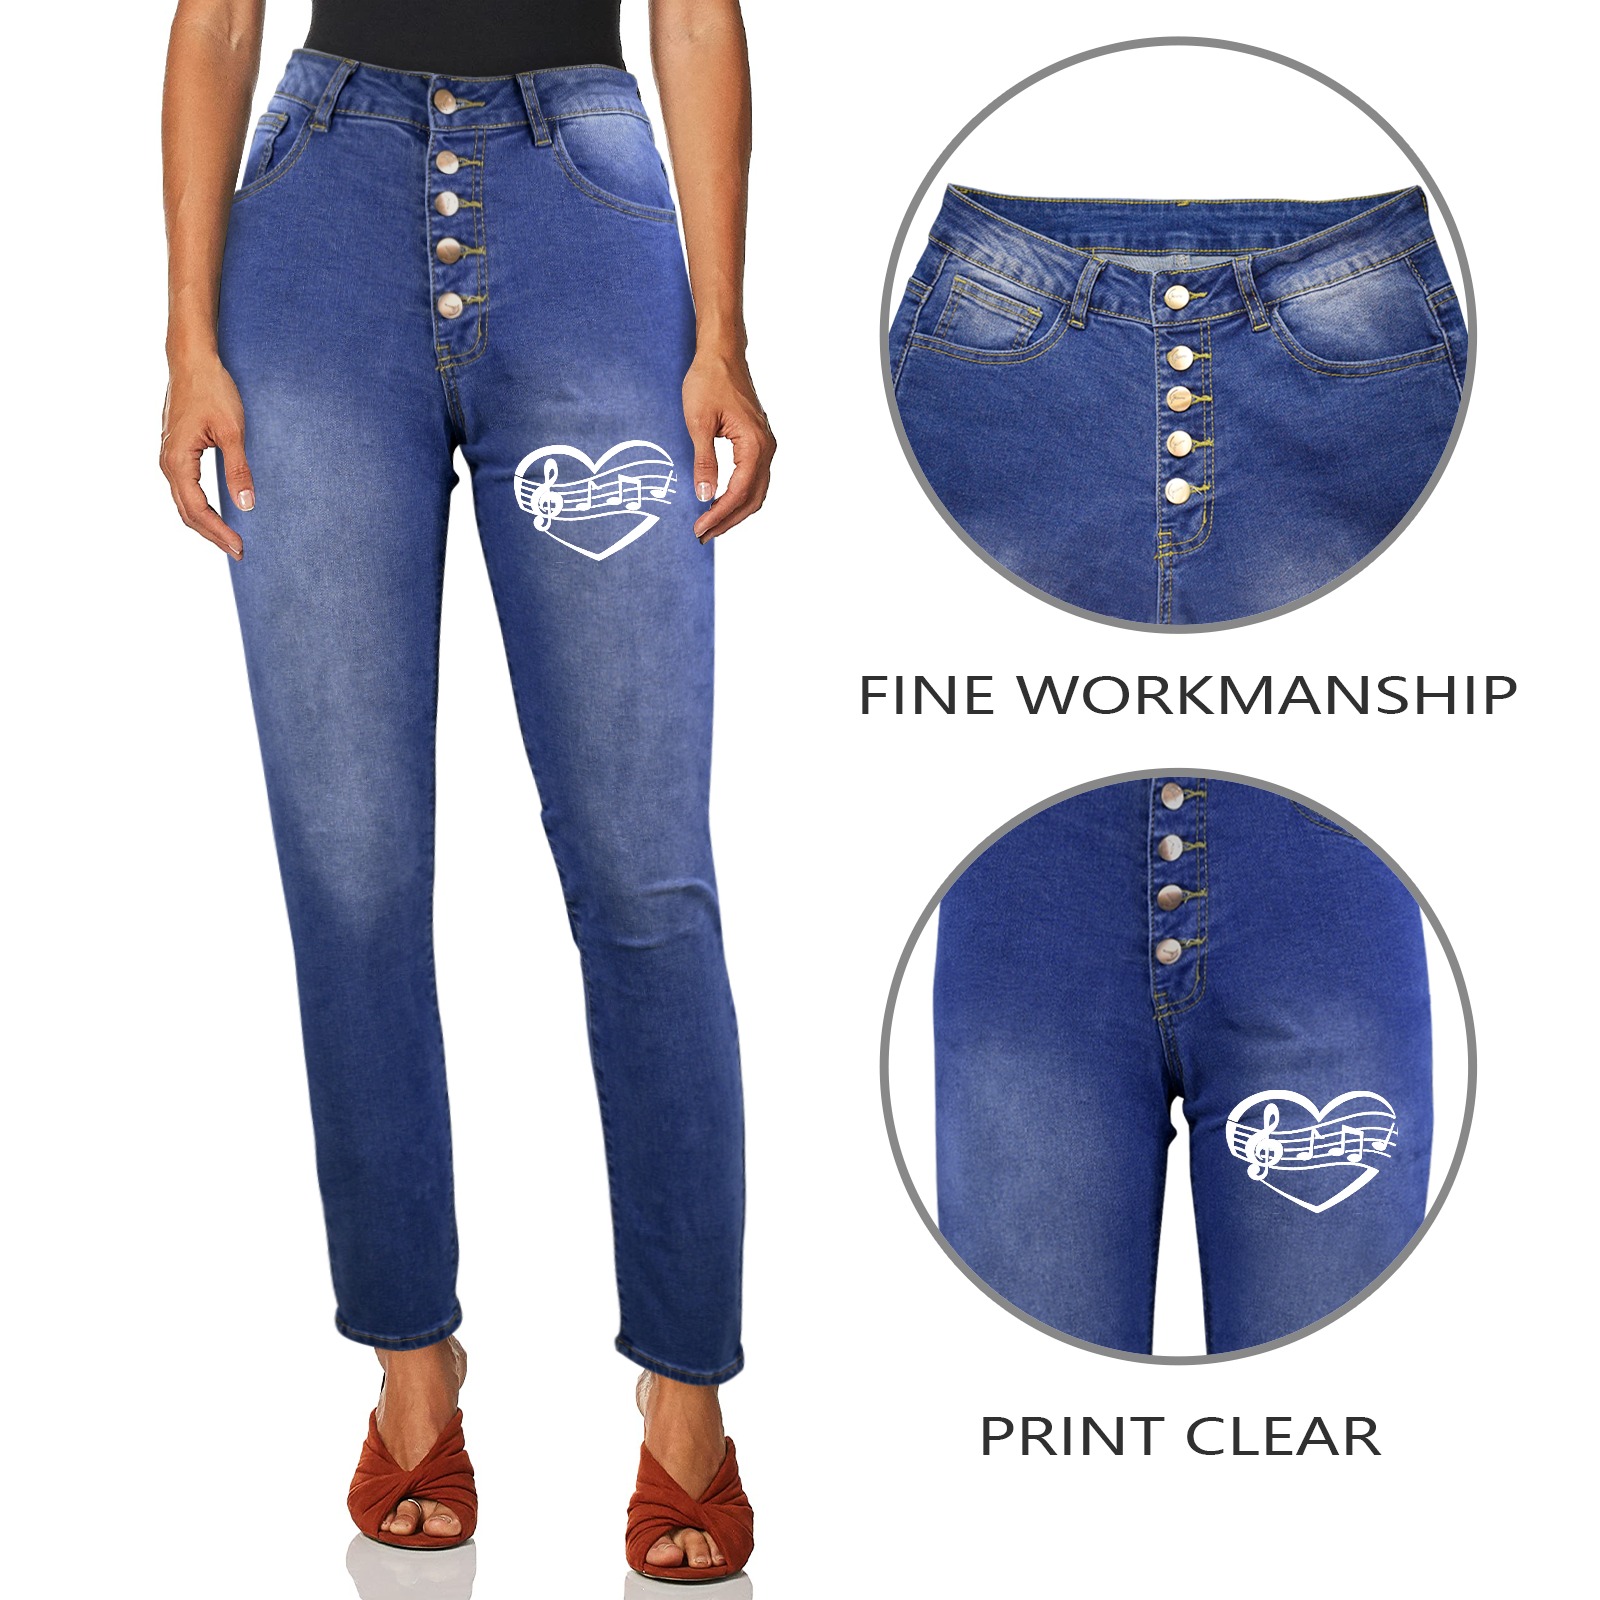 I love music, violin clef, notes, heart in white. Women's Jeans (Front Printing)